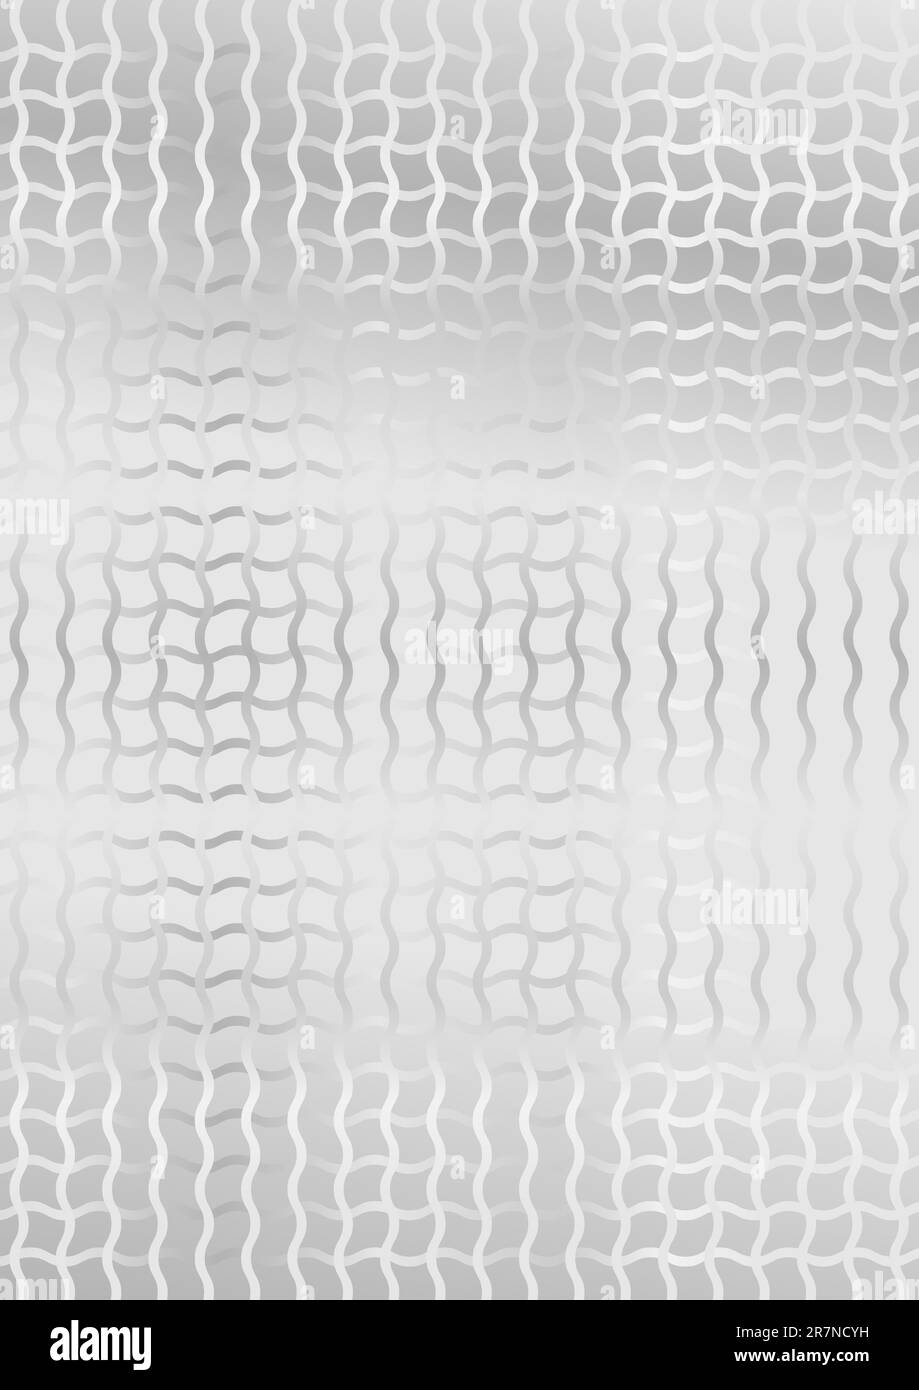 Abstract Background - Metallic Wire Grid on Grey Background Stock Vector